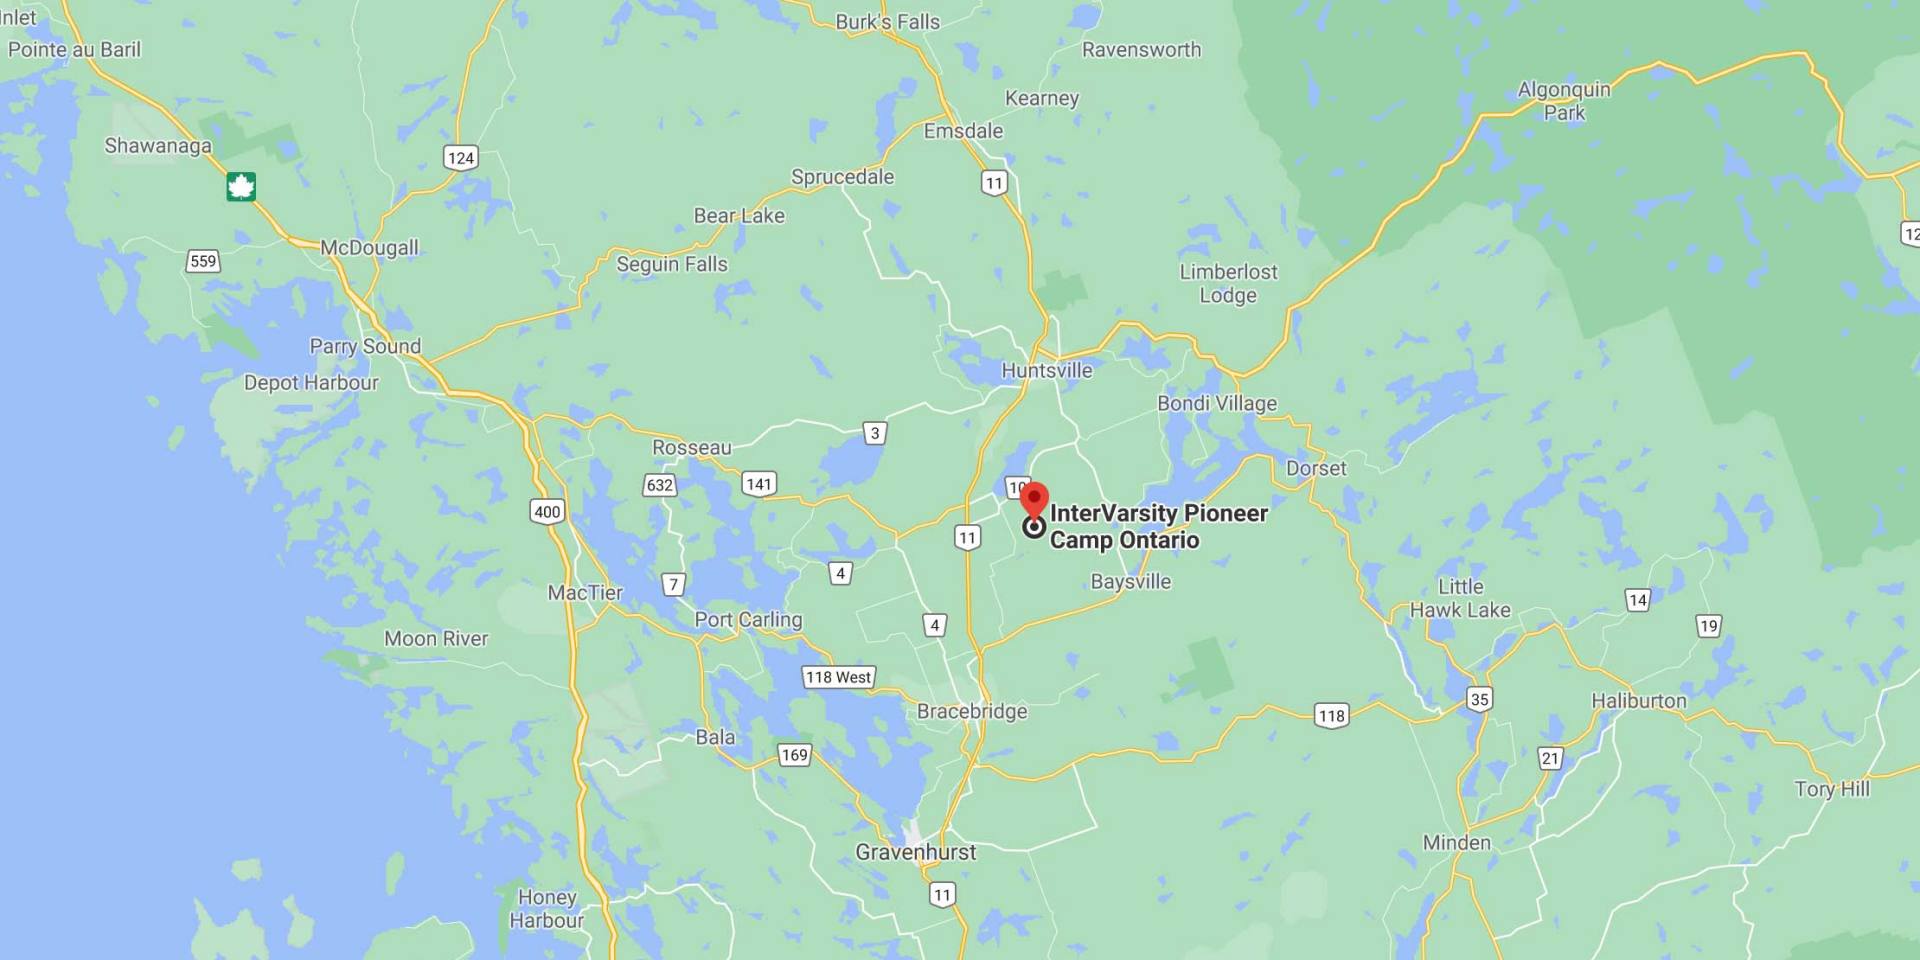 A map with Pioneer Camp Ontario's location indicated. Links to Google maps directions.